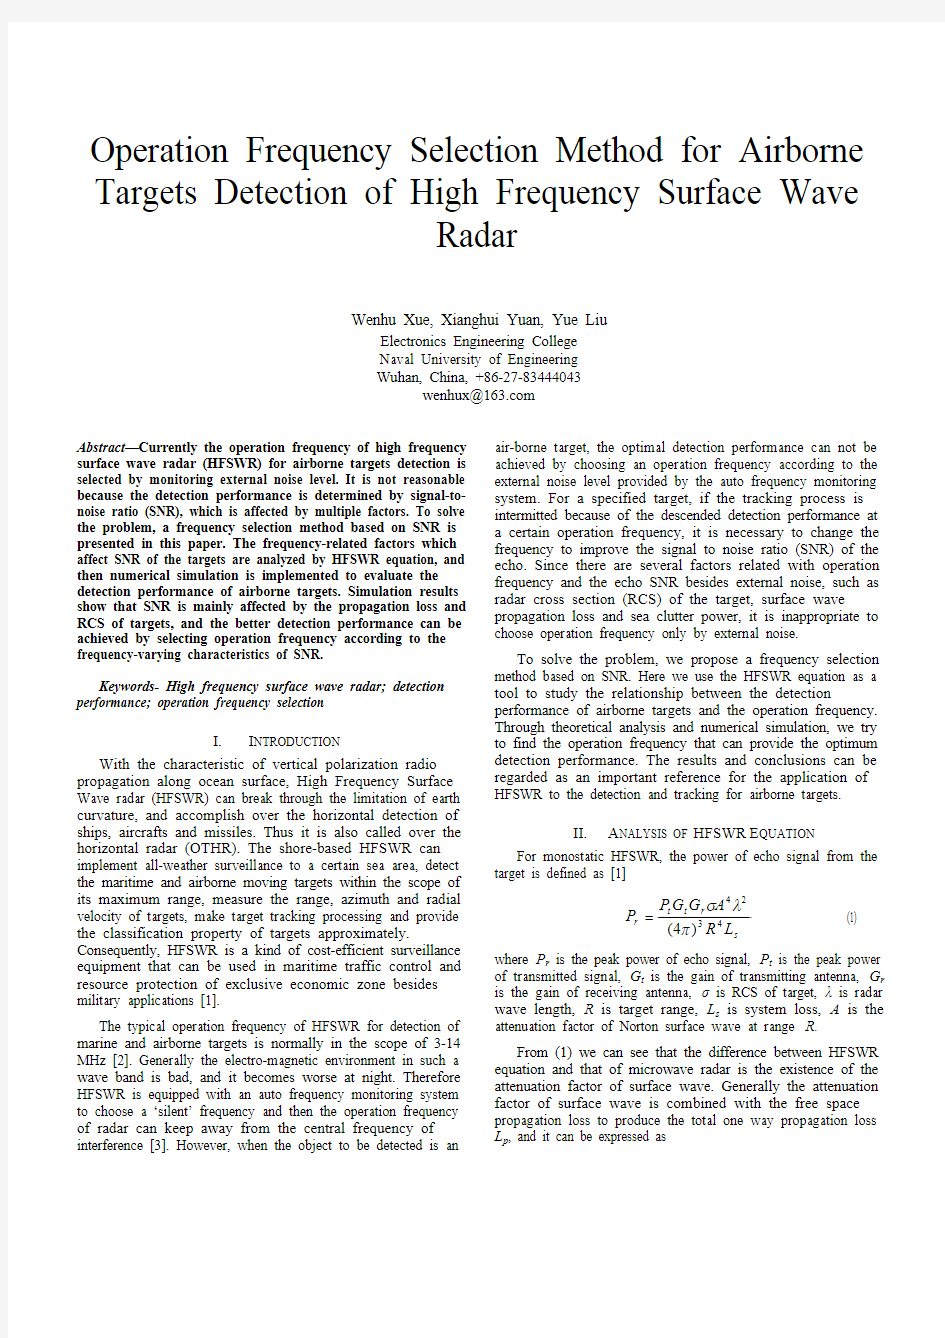 Operation Frequency Selection Method for Airborne Targets Detection of HFSWR